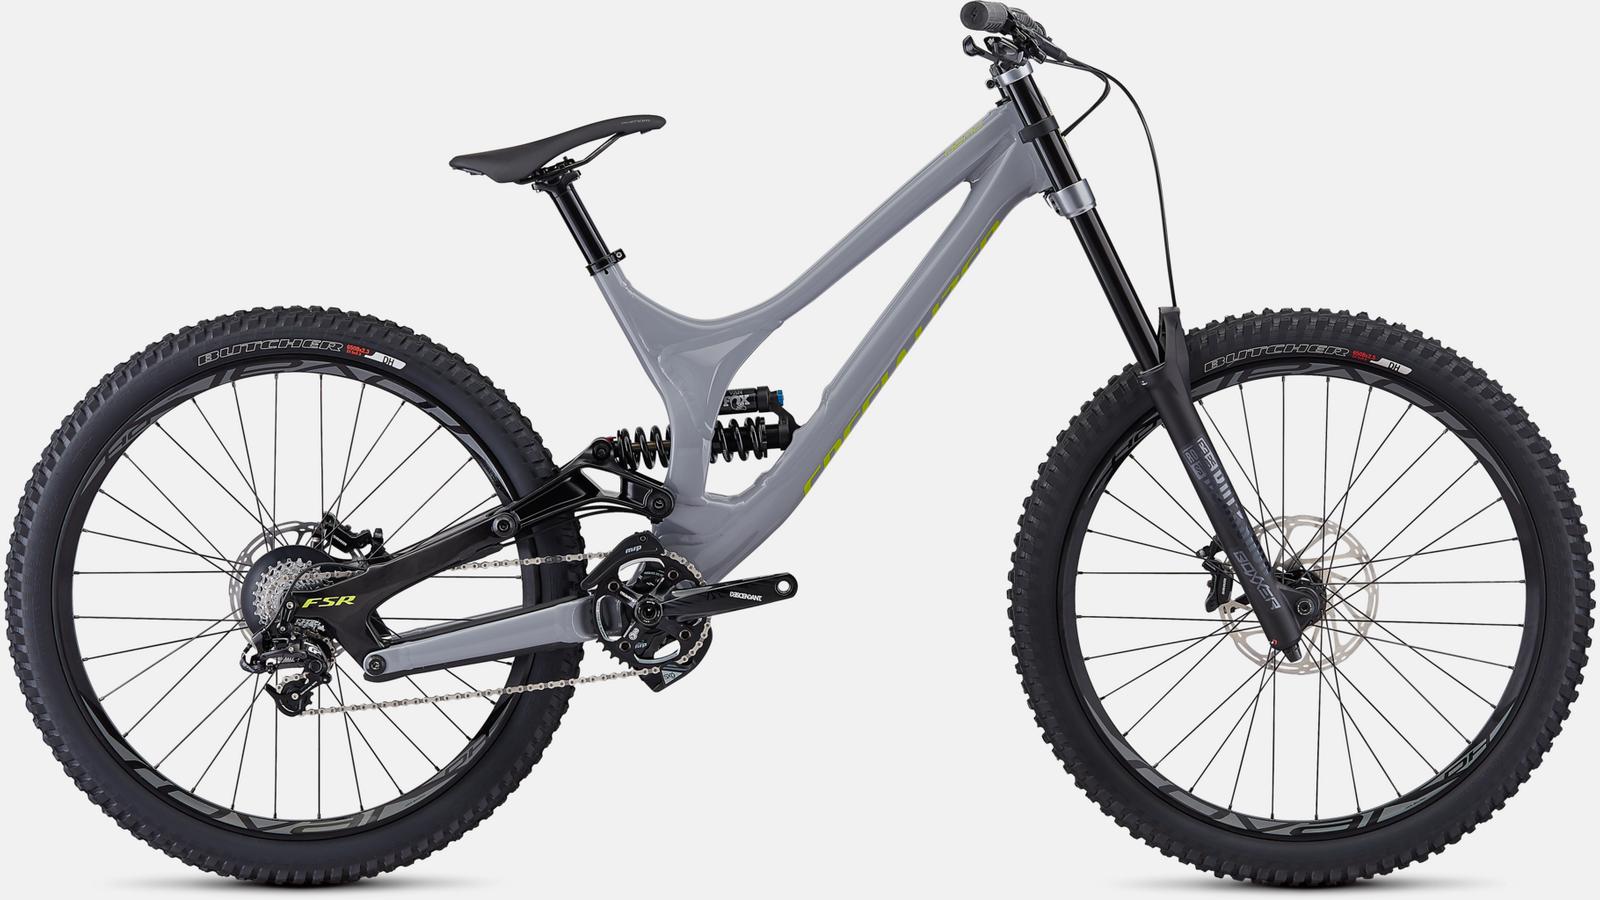 Paint for 2019 Specialized Demo Alloy 27.5 - Gloss Cool Grey